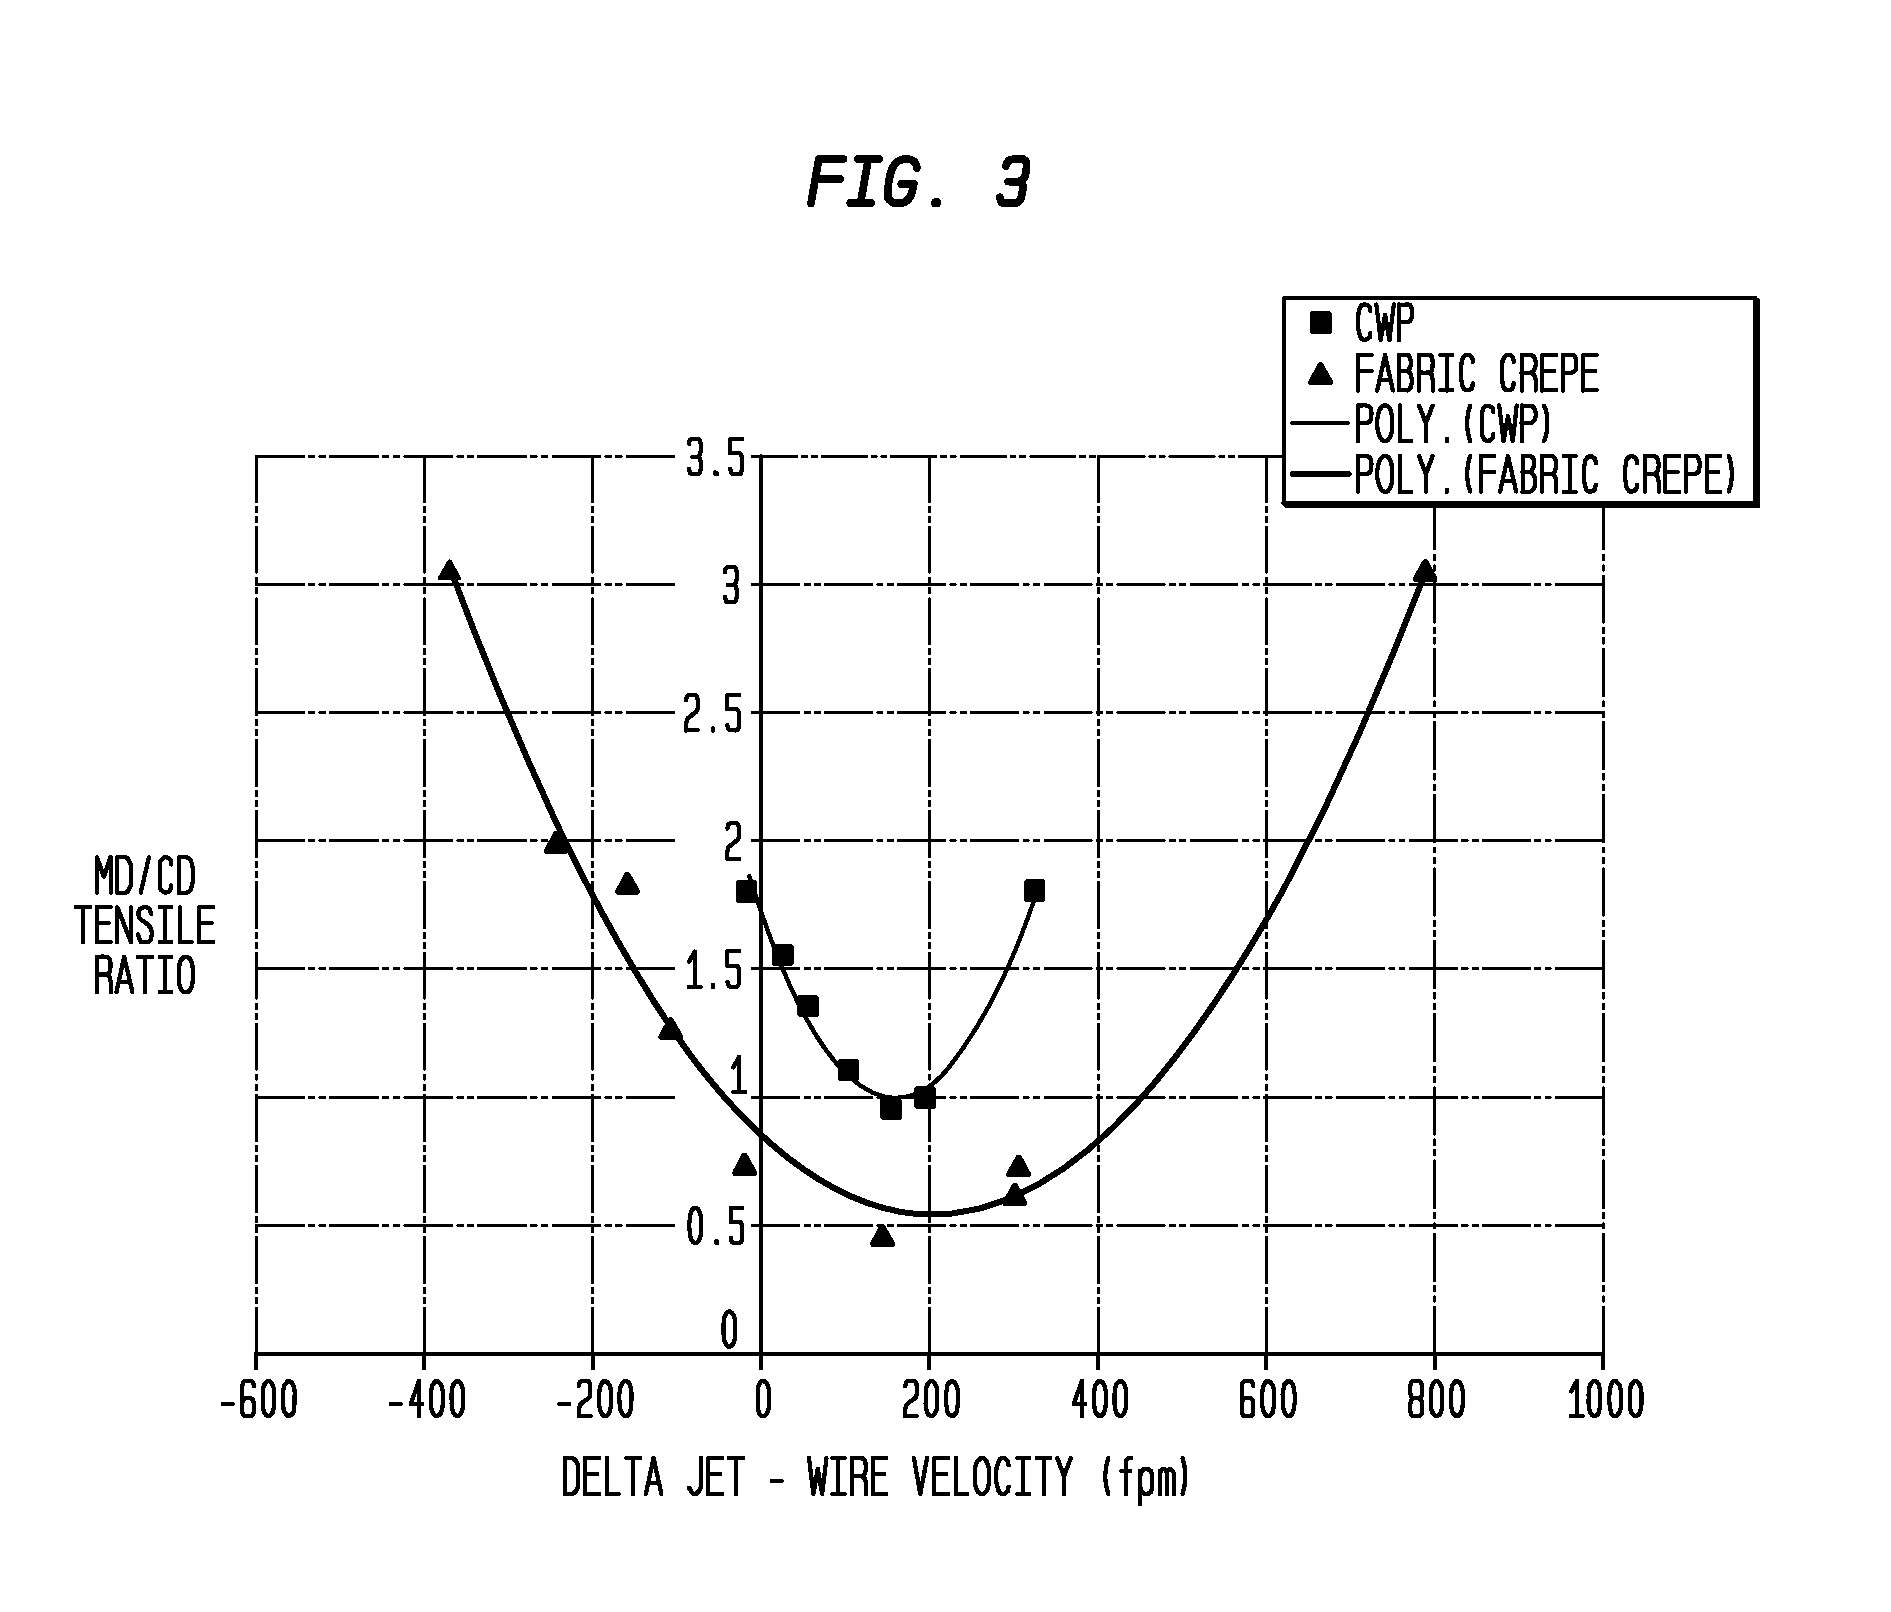 Method of producing absorbent sheet with increased wet/dry CD tensile ratio